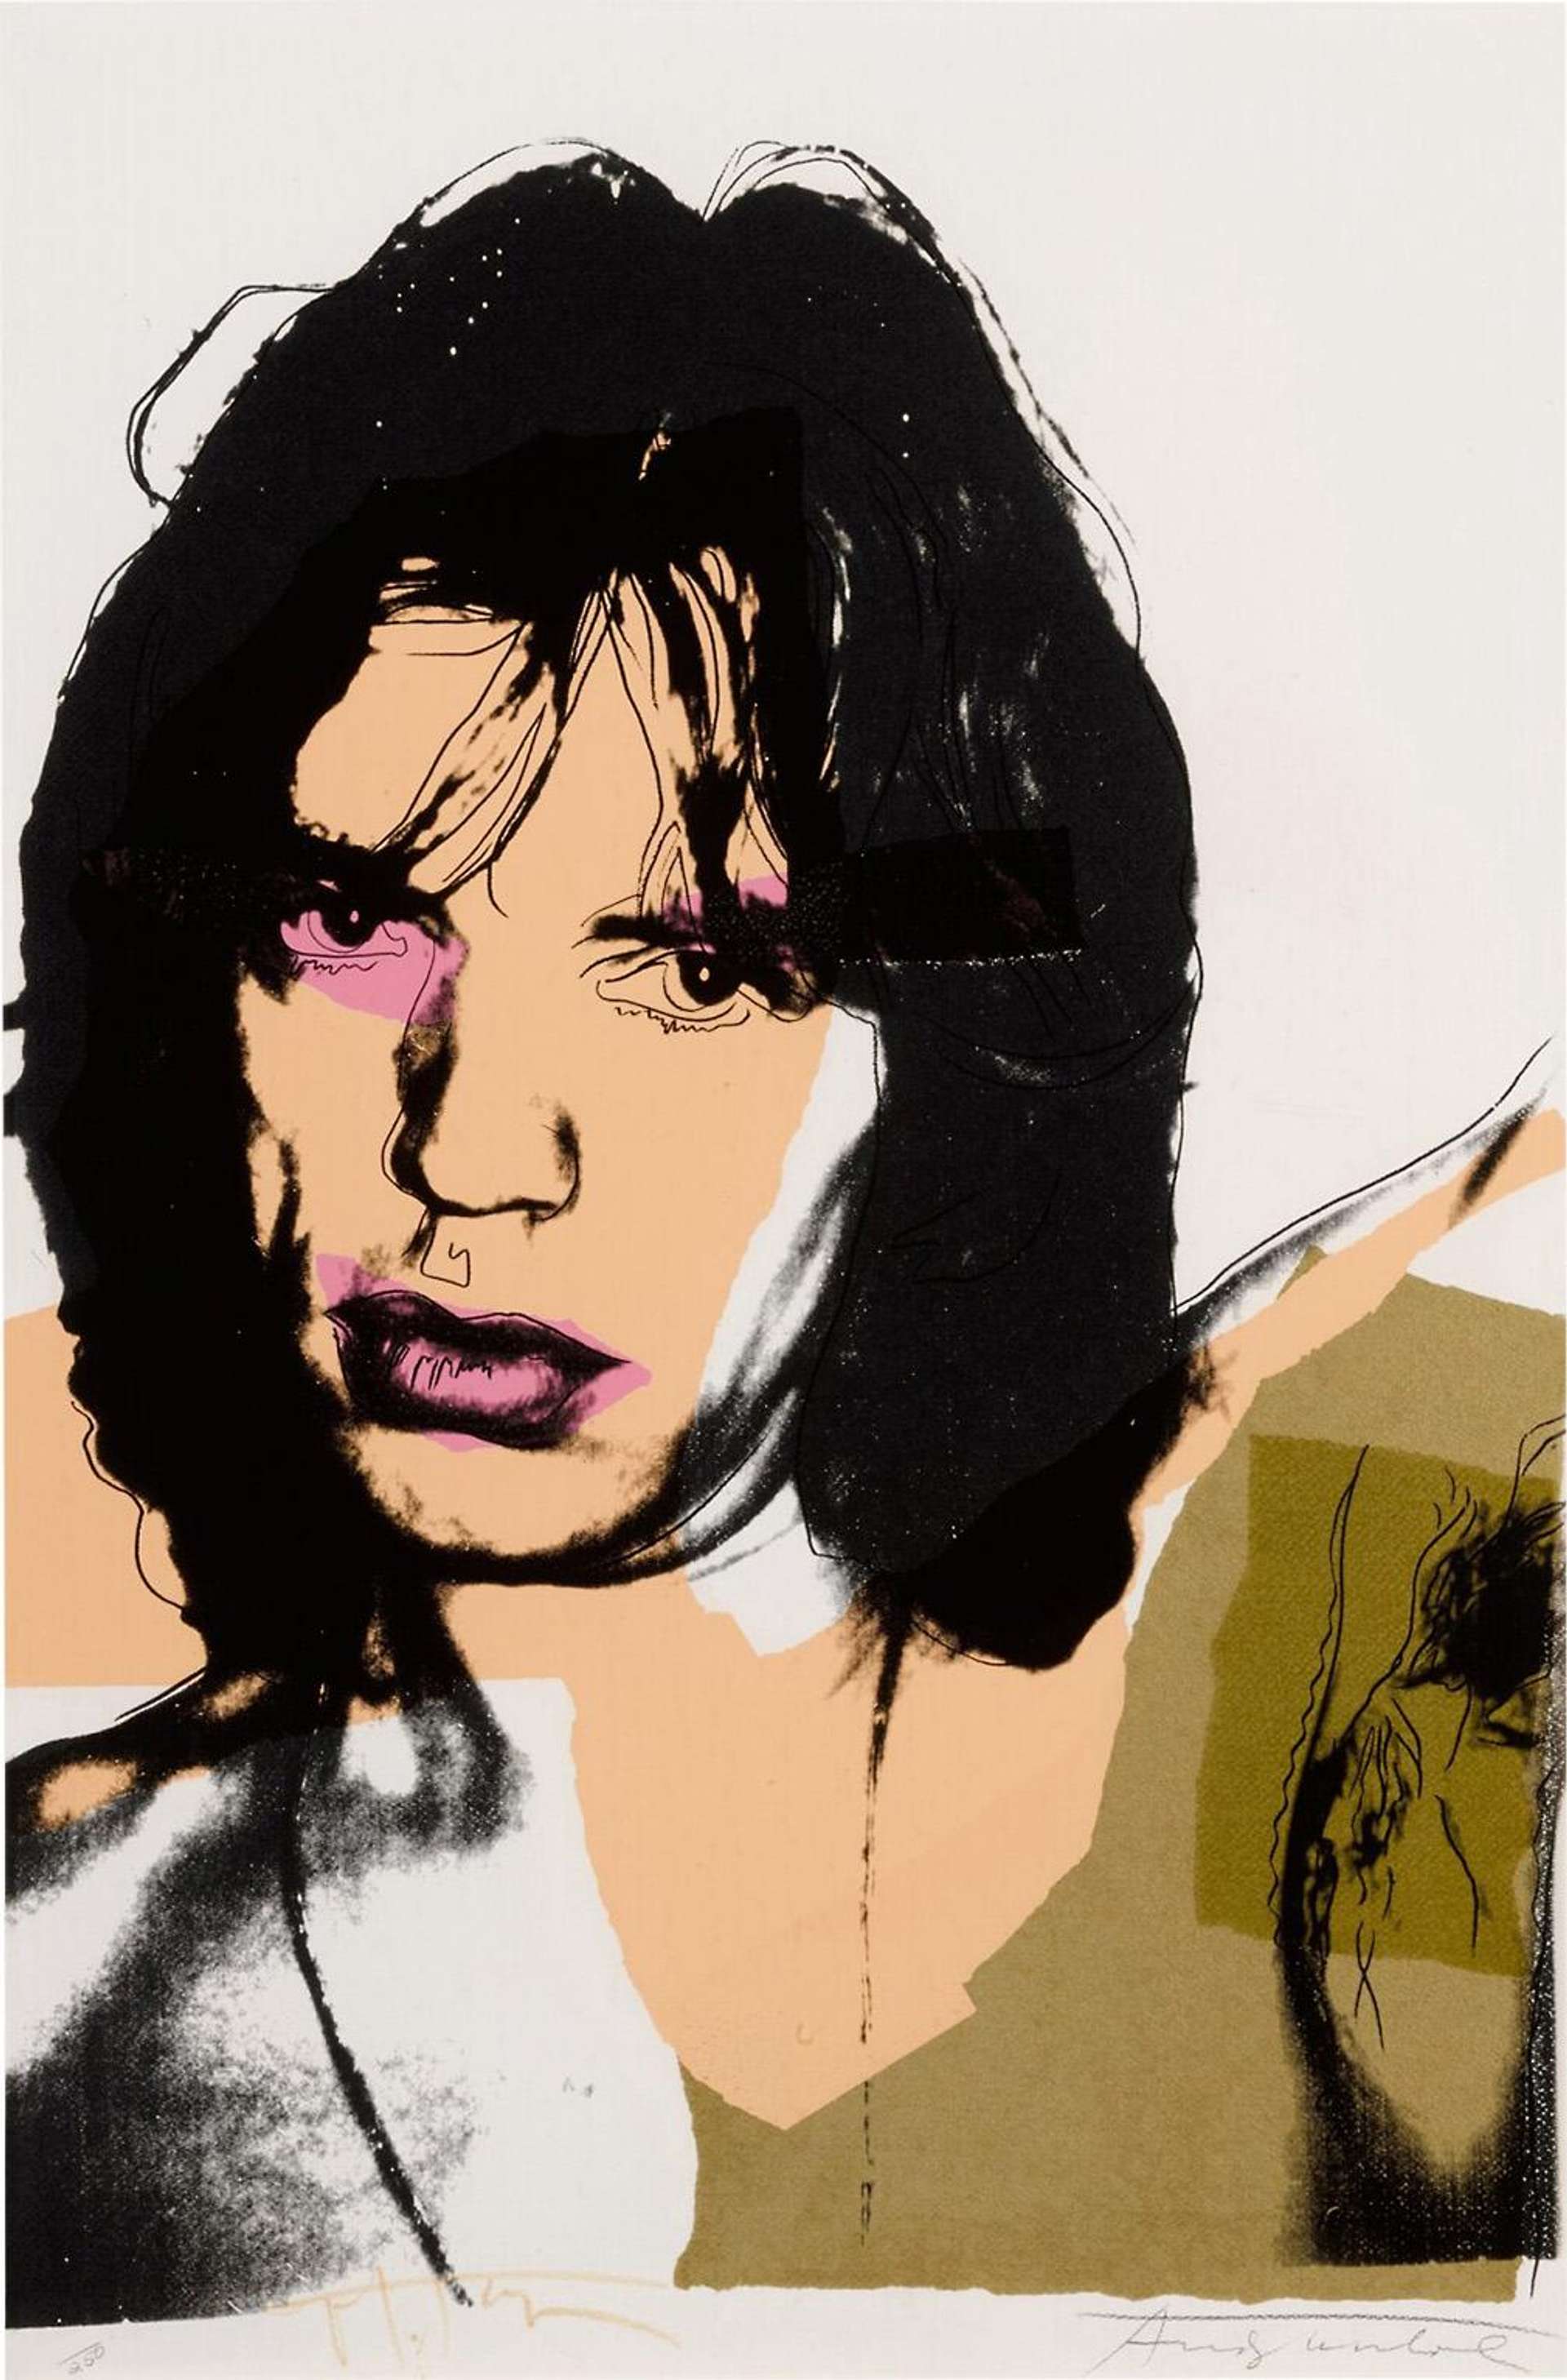 Mick Jagger (F. & S. II.141) depicts the rockstar and Rolling Stones lead singer Mick Jagger, shirtless and gazing into the camera. Swatches of colourful paint cover his features.